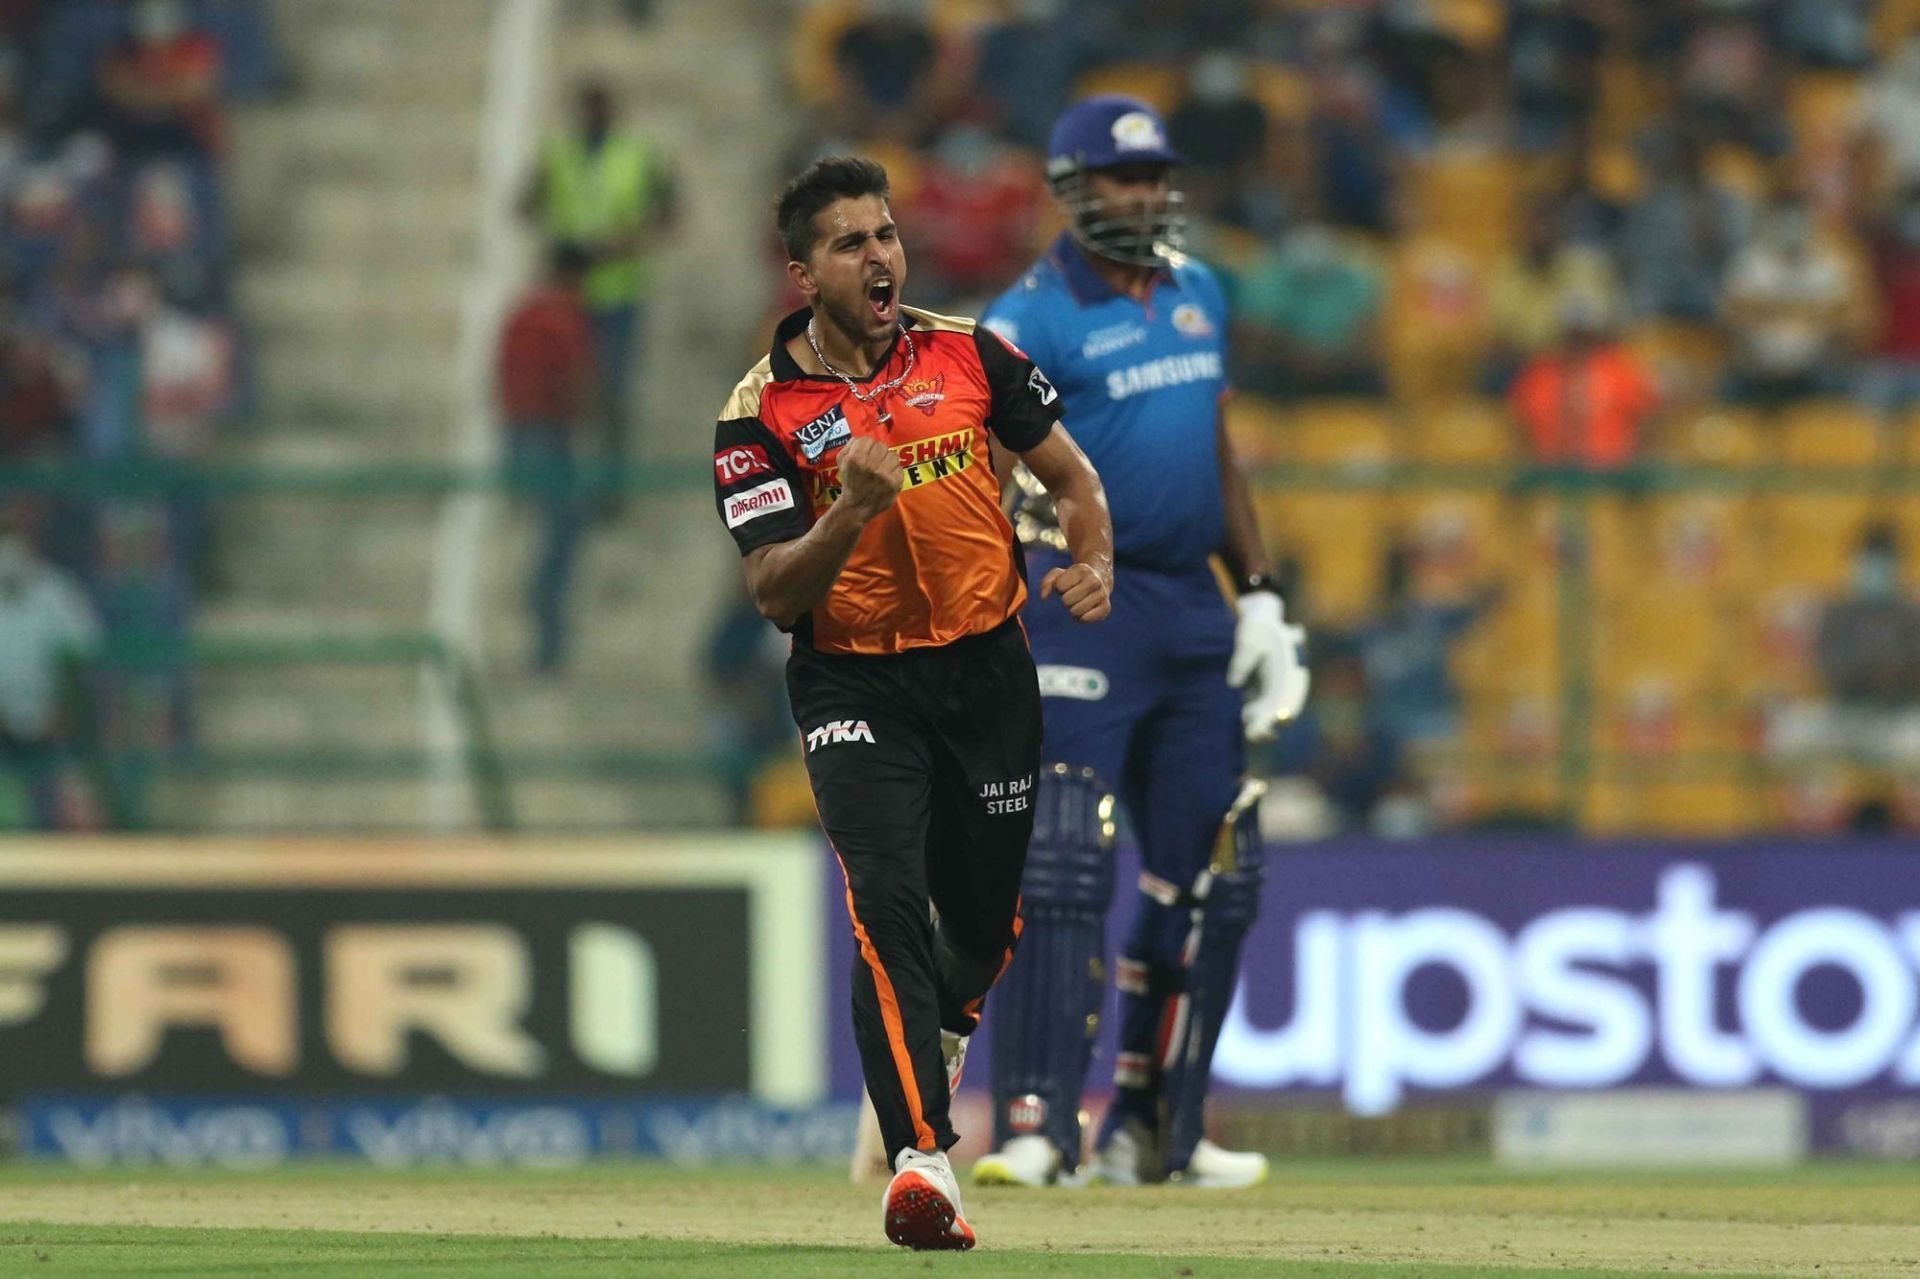 Umran Malik&#039;s velocity was one of the few bright spots in an otherwise disappointing campaign for SRH in IPL 2021 (Picture Credits: Deepak Malik/Sportzpics/IPL)